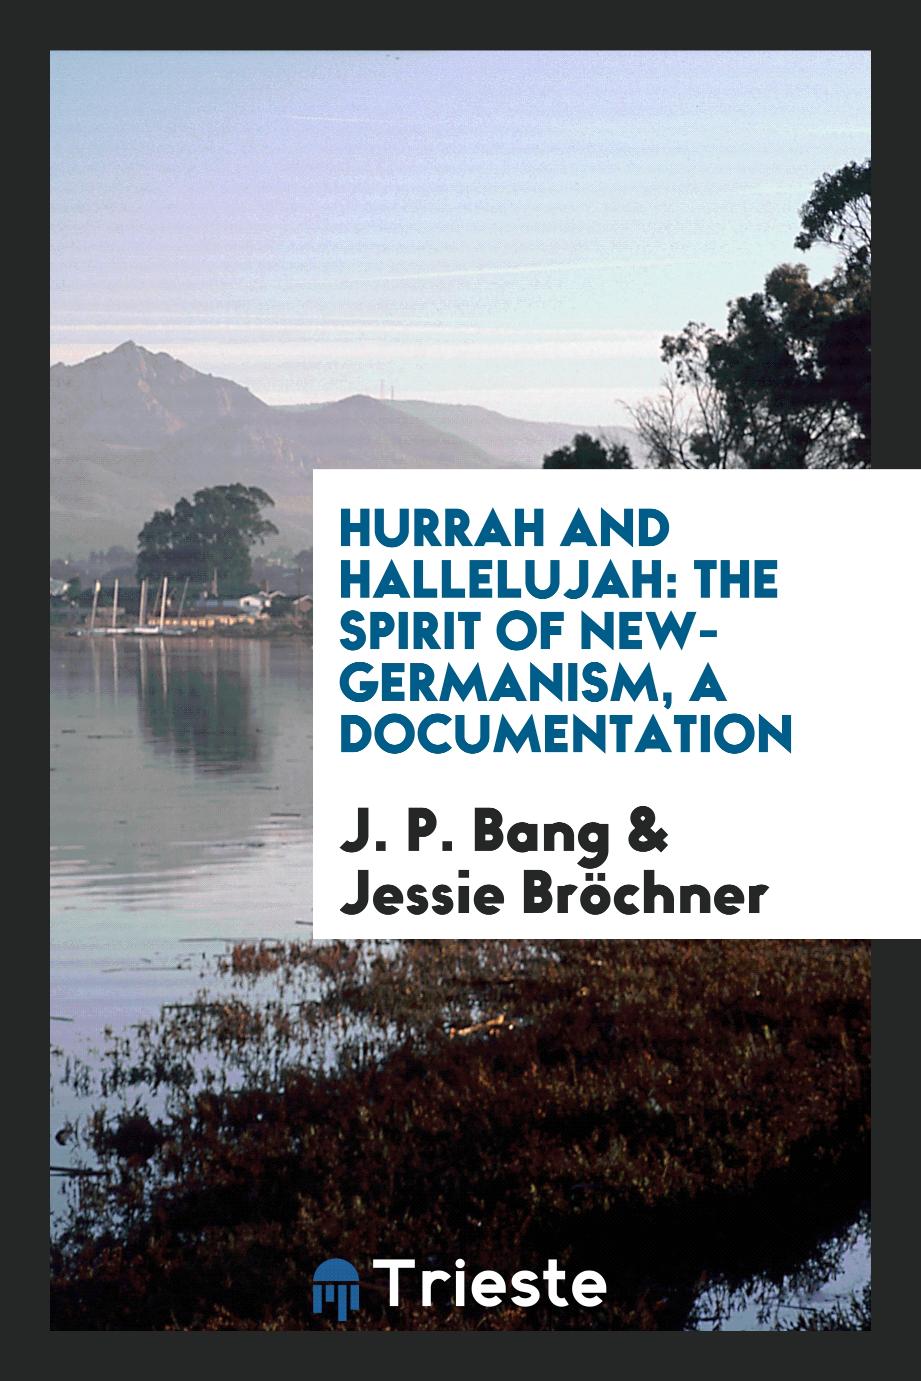 Hurrah and hallelujah: the spirit of new-Germanism, a documentation